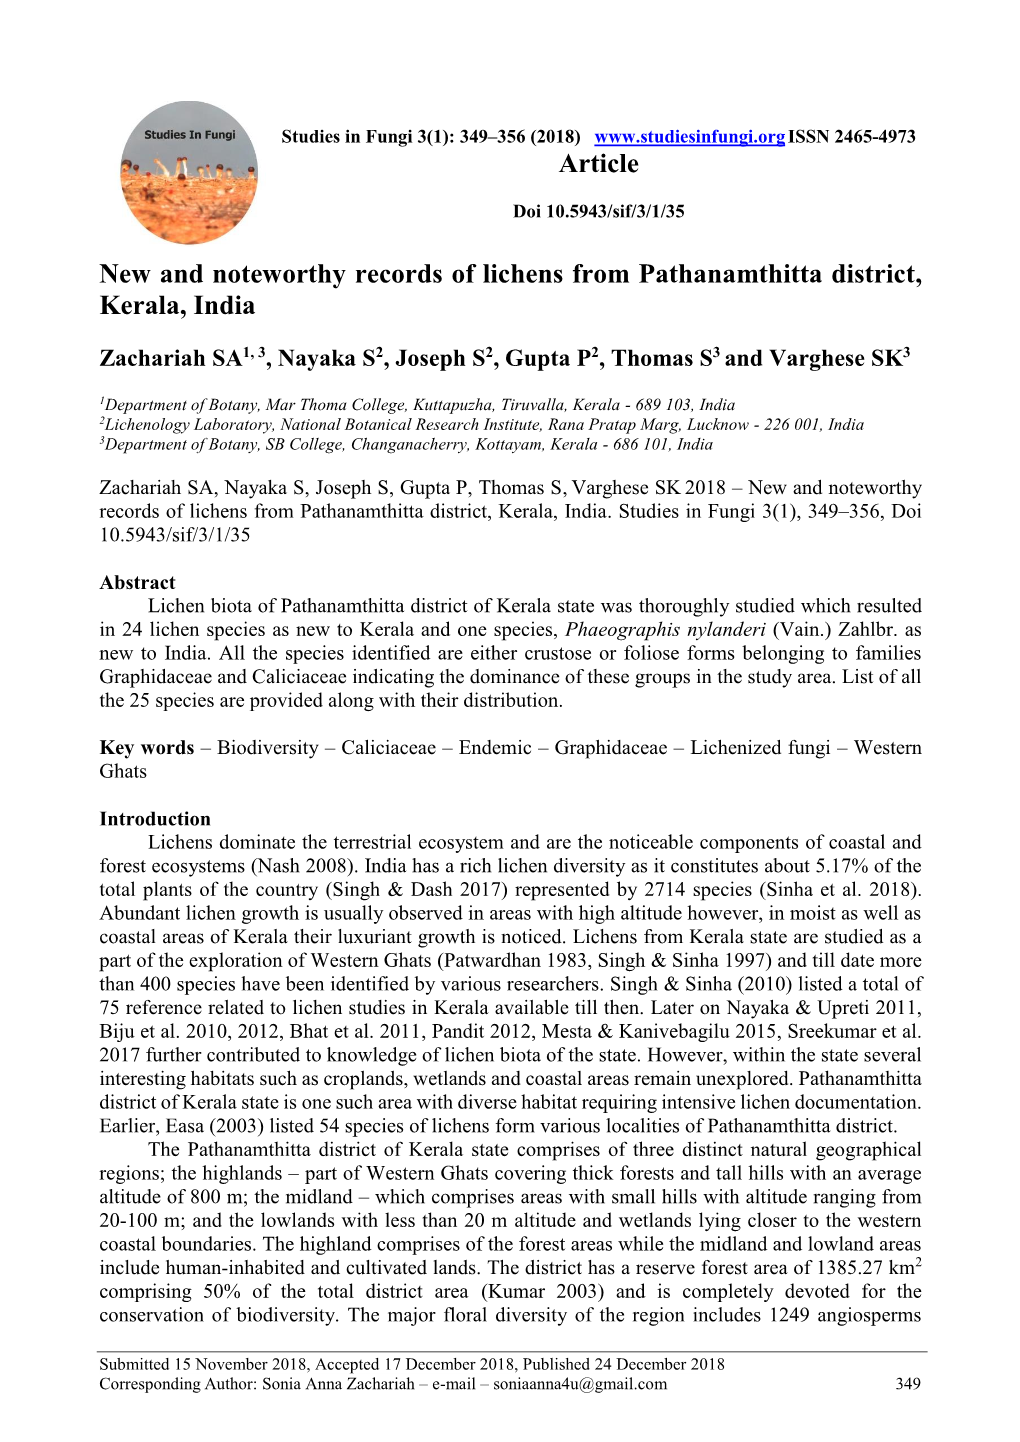 New and Noteworthy Records of Lichens from Pathanamthitta District, Kerala, India